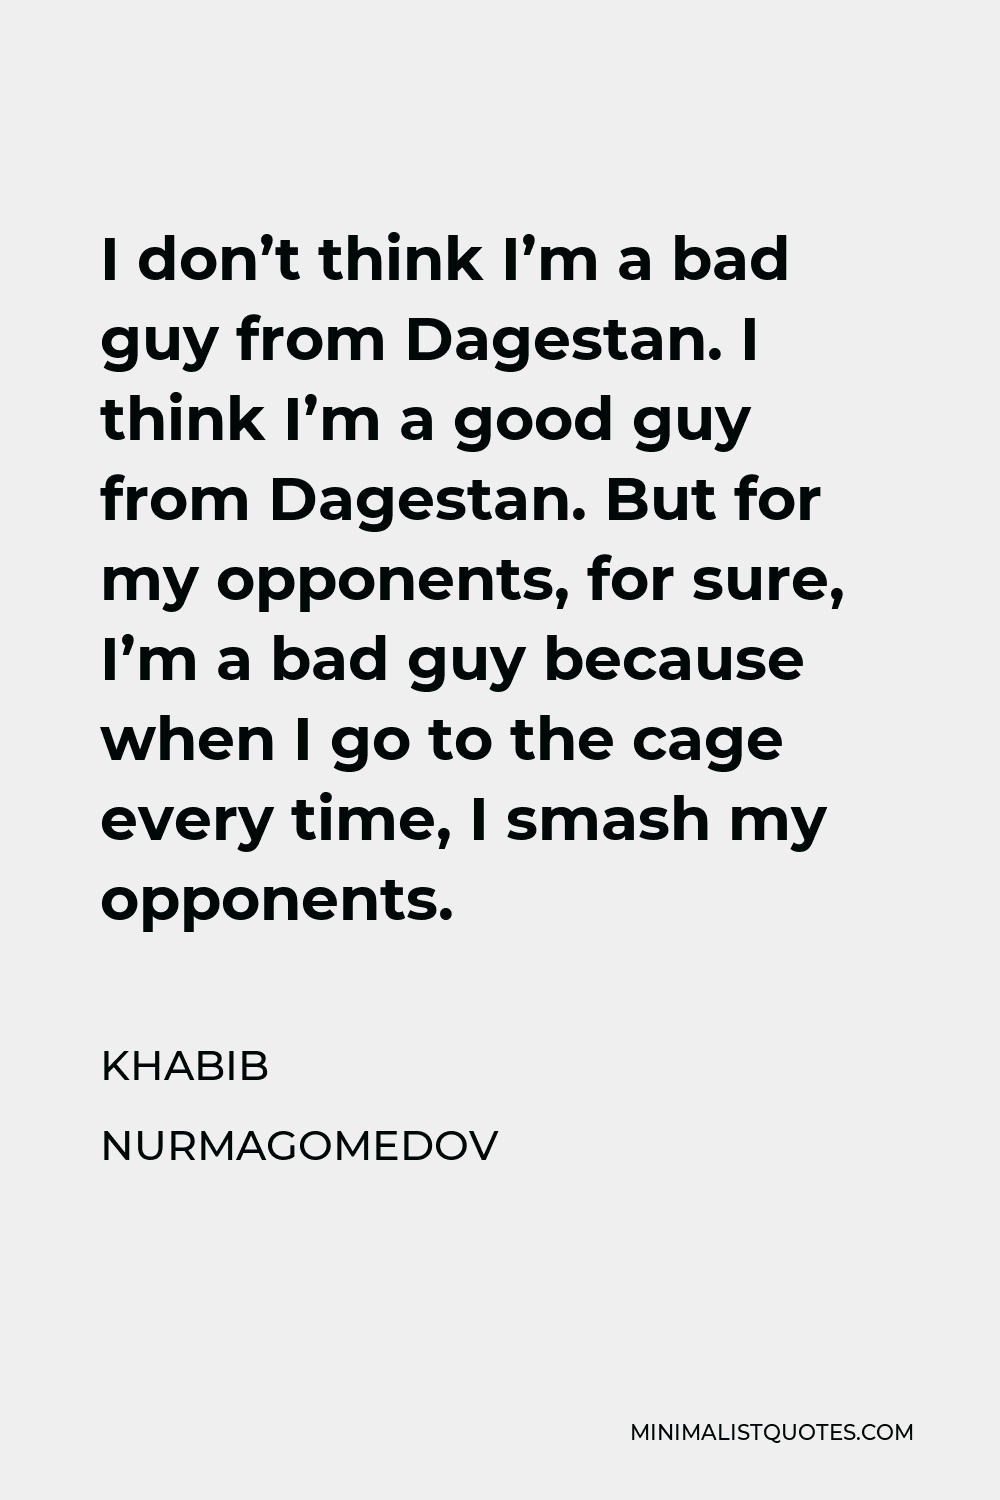 Khabib Nurmagomedov Quote - I don’t think I’m a bad guy from Dagestan. I think I’m a good guy from Dagestan. But for my opponents, for sure, I’m a bad guy because when I go to the cage every time, I smash my opponents.